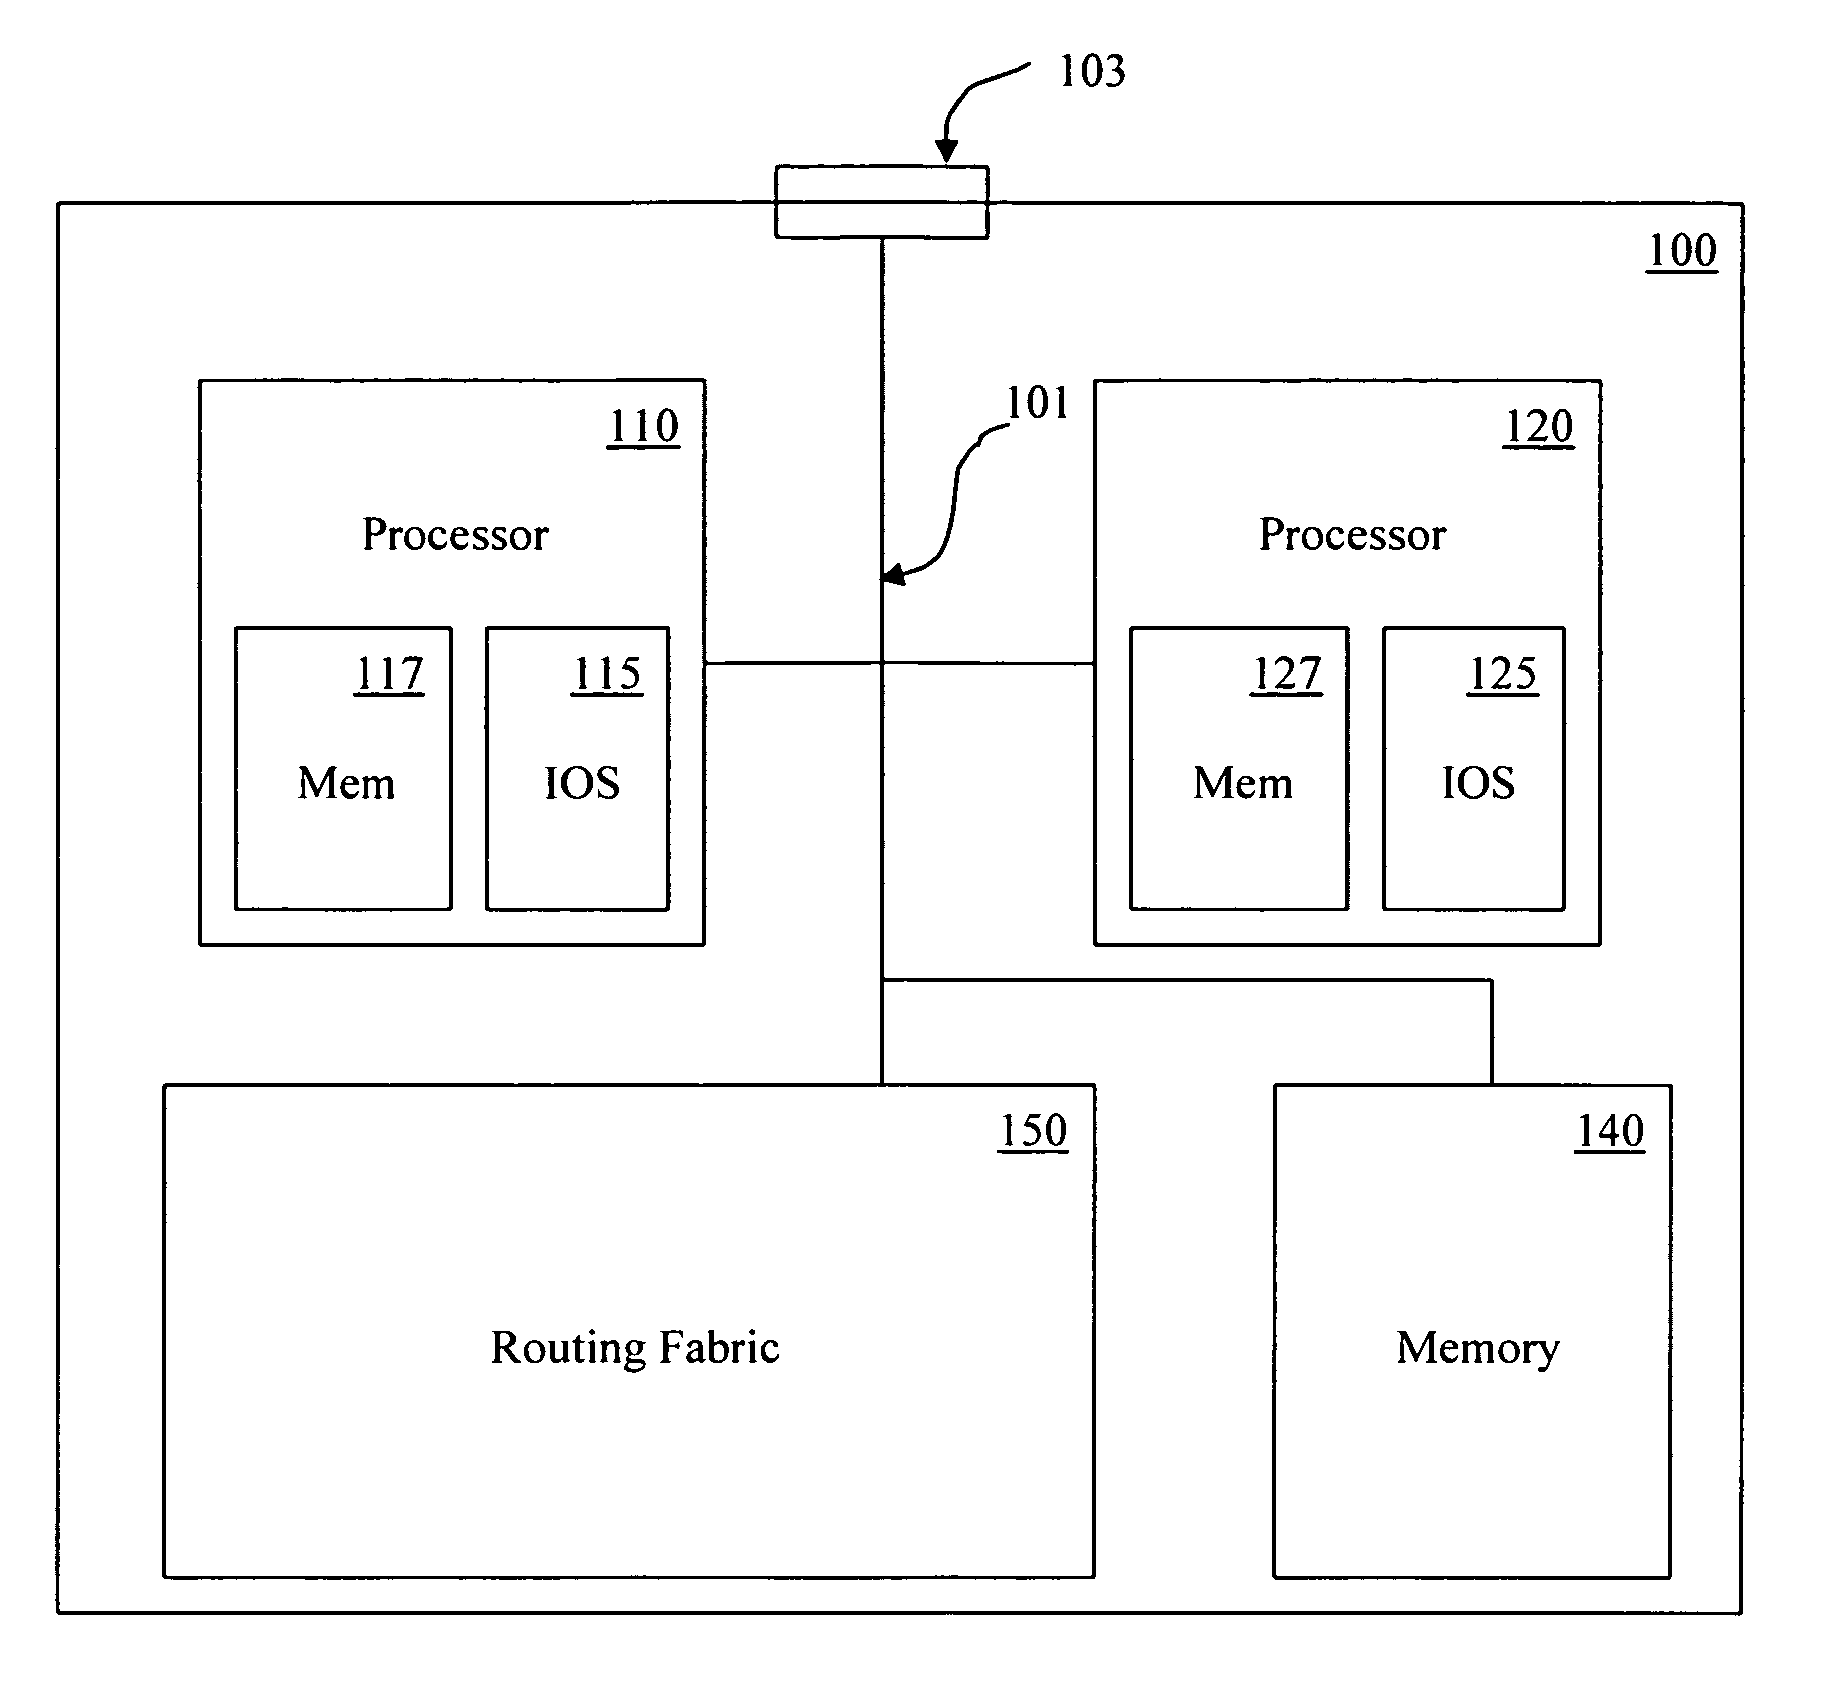 Method of ensuring consistent configuration between processors running different versions of software